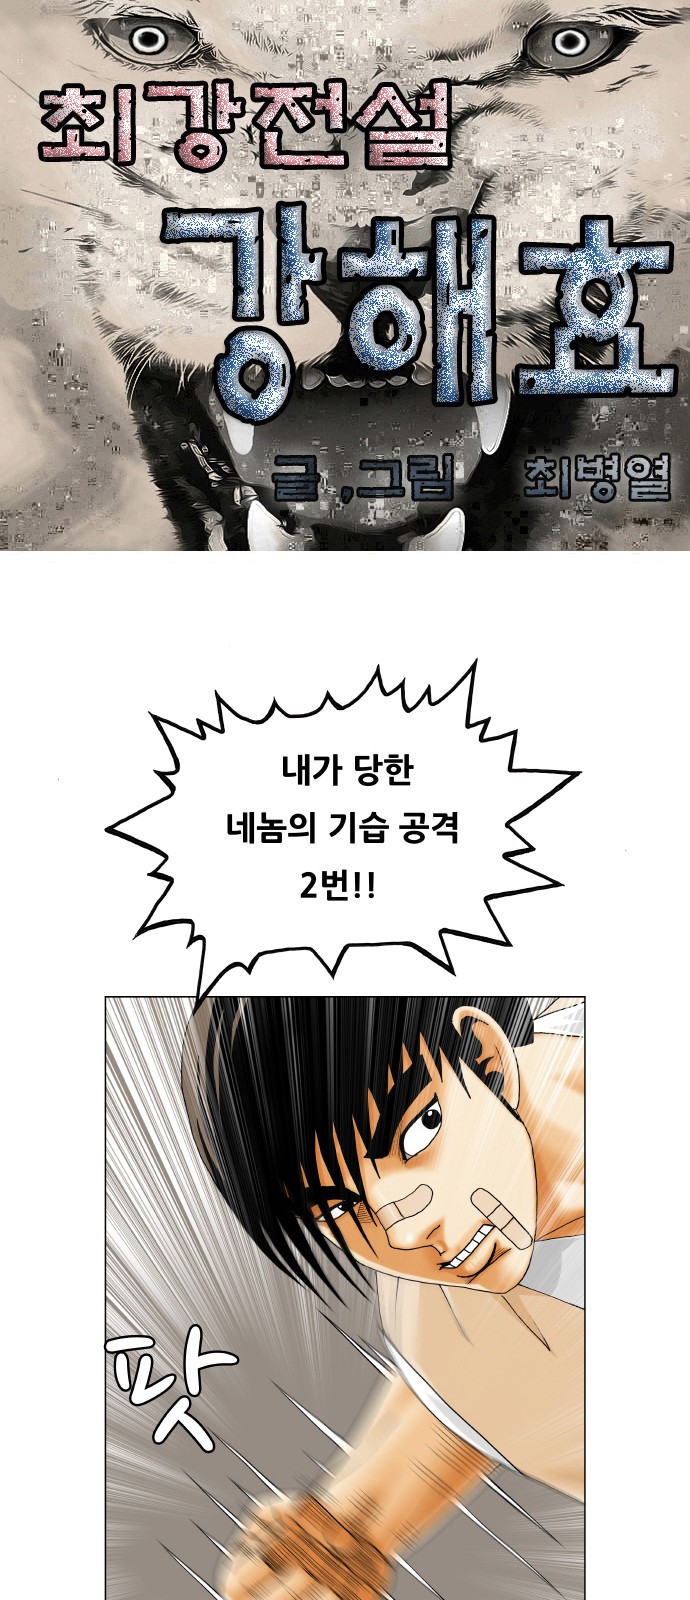 Ultimate Legend - Kang Hae Hyo - Chapter 392 - Page 1